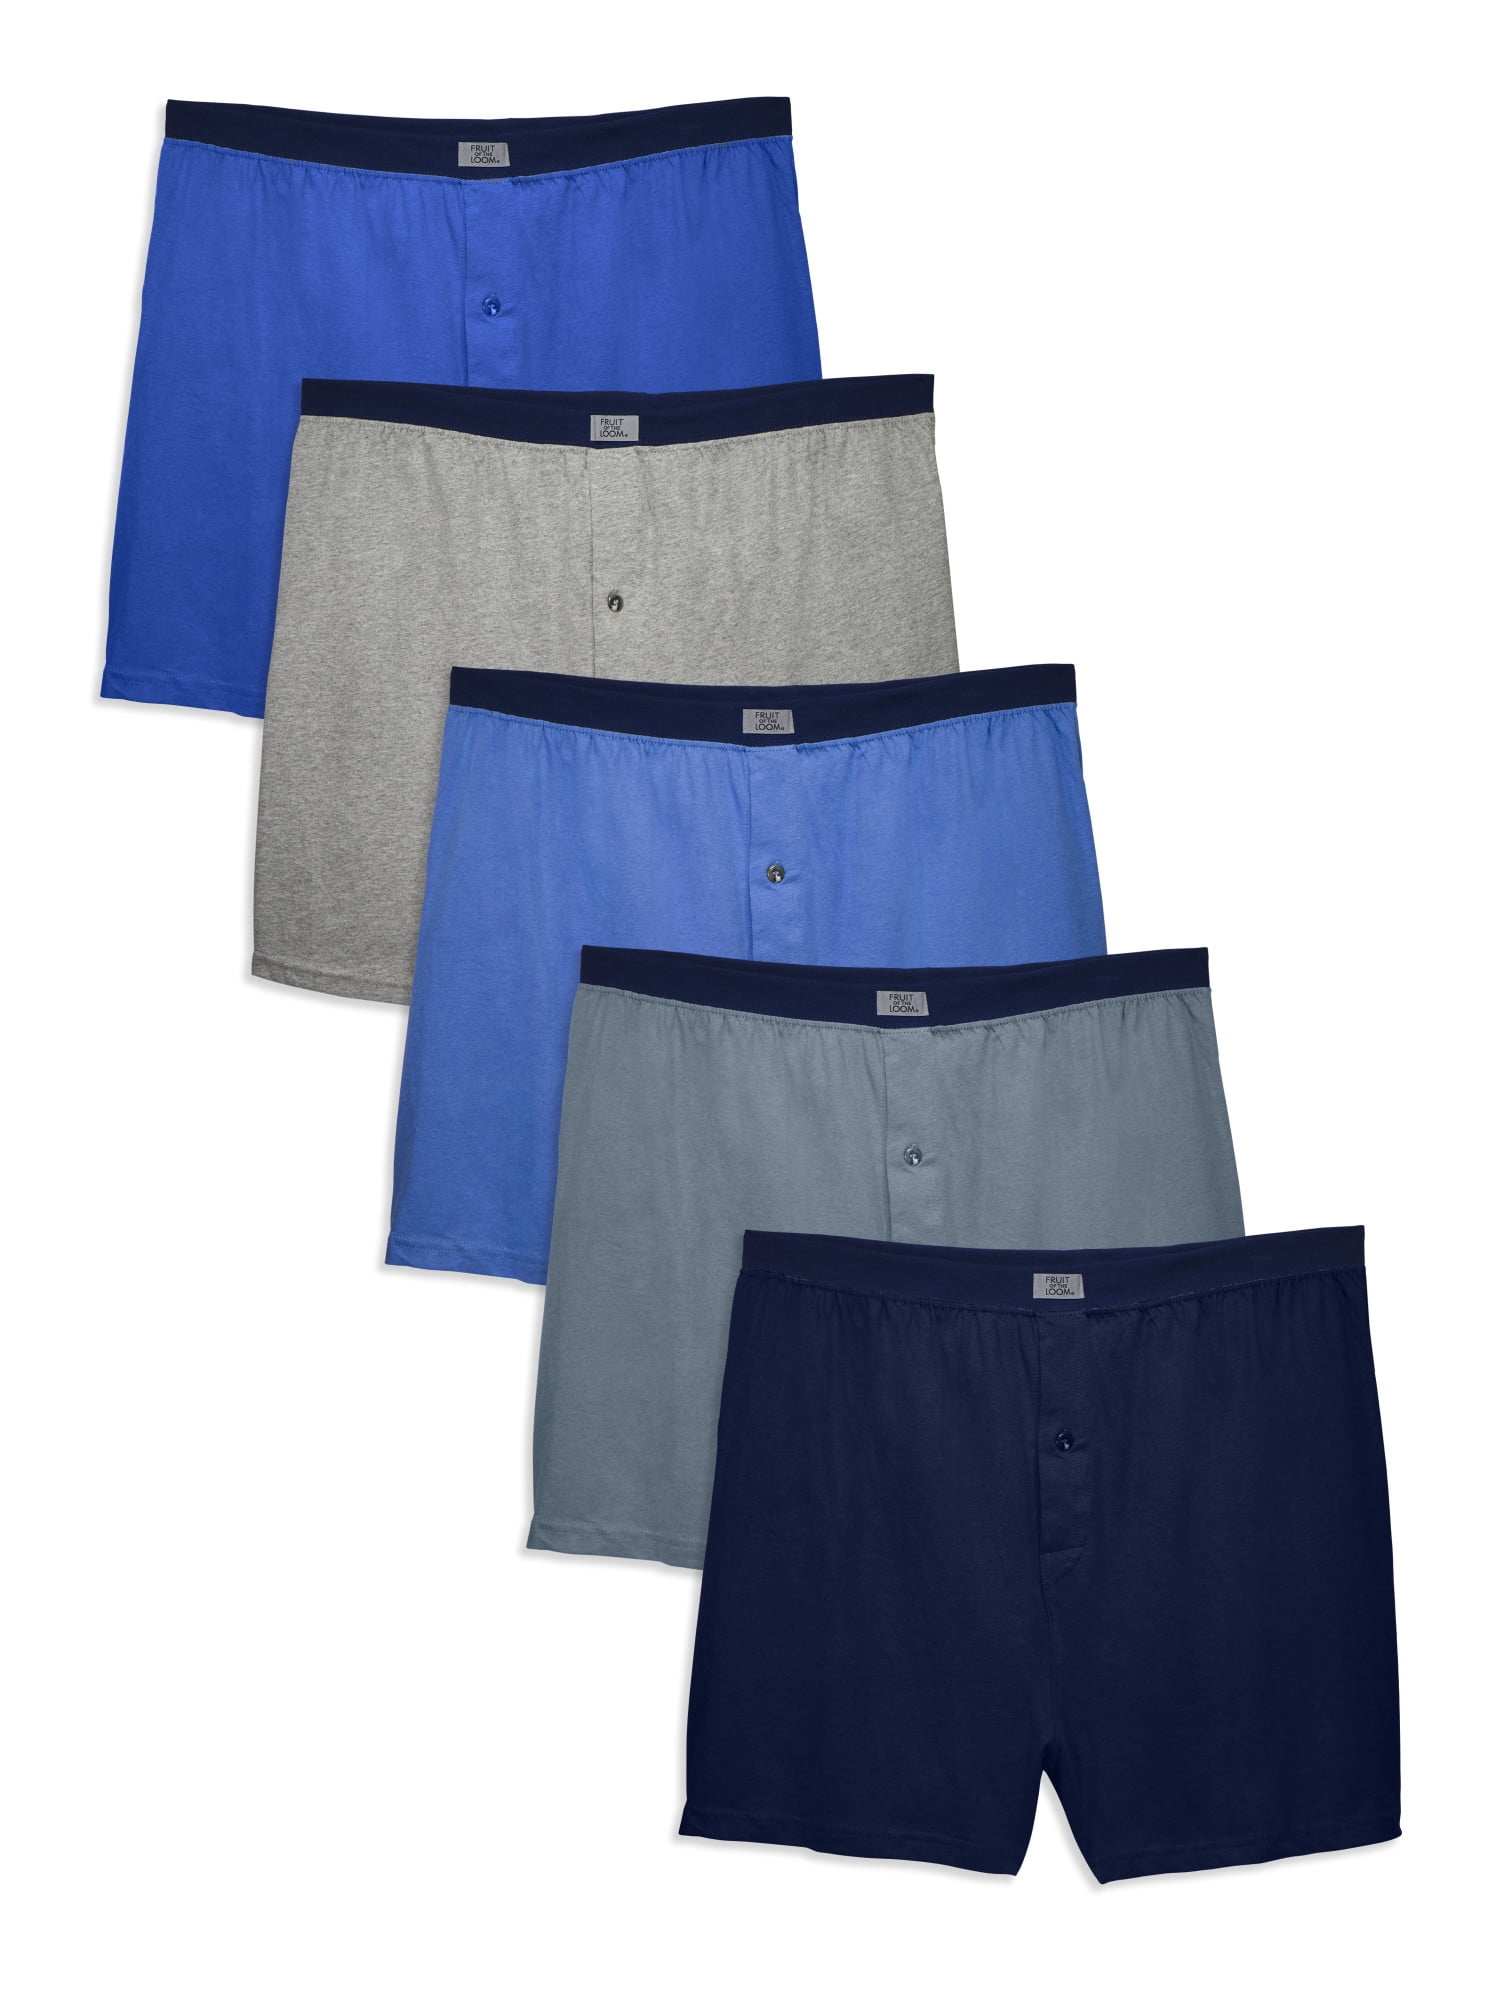 Fruit of the Loom Men's Assorted Knit Boxers, 5 Pack 